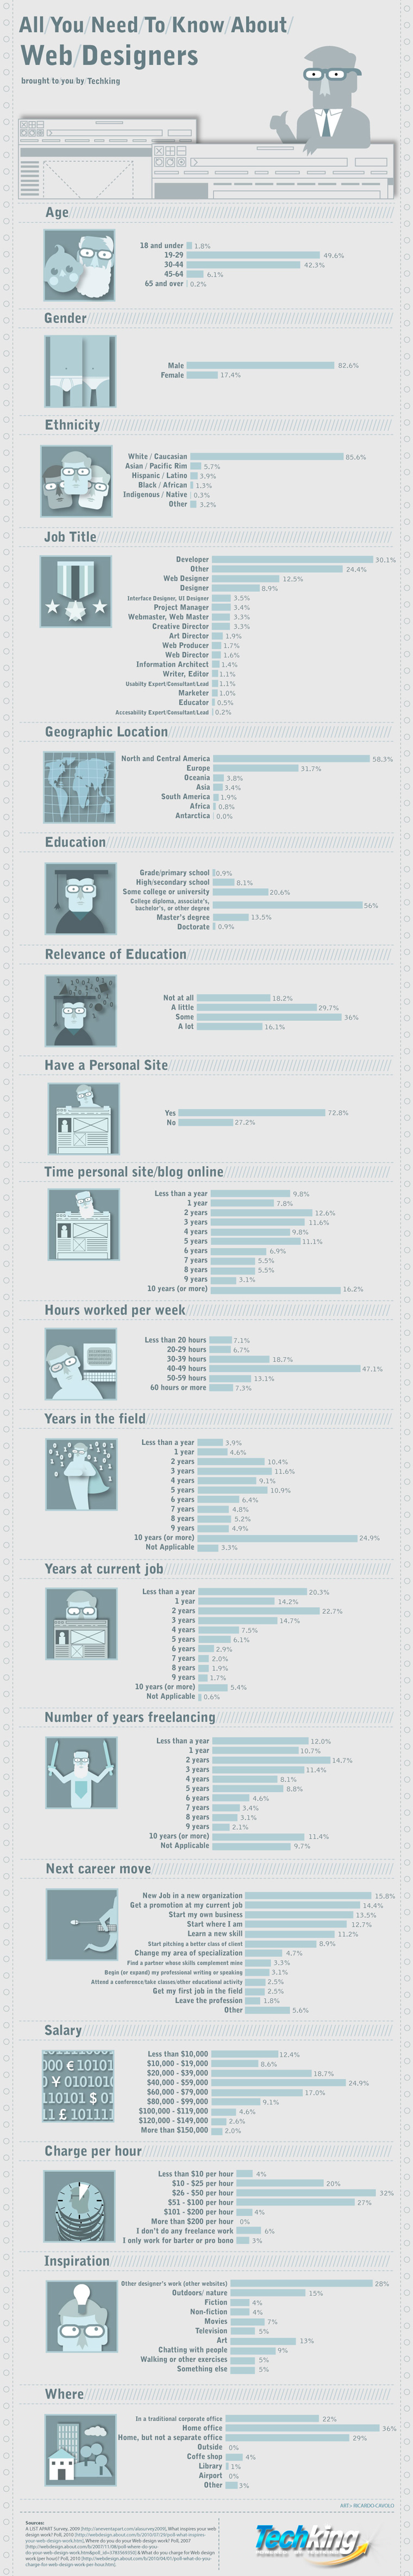 All You Need To Know About Web Designers - Infographic